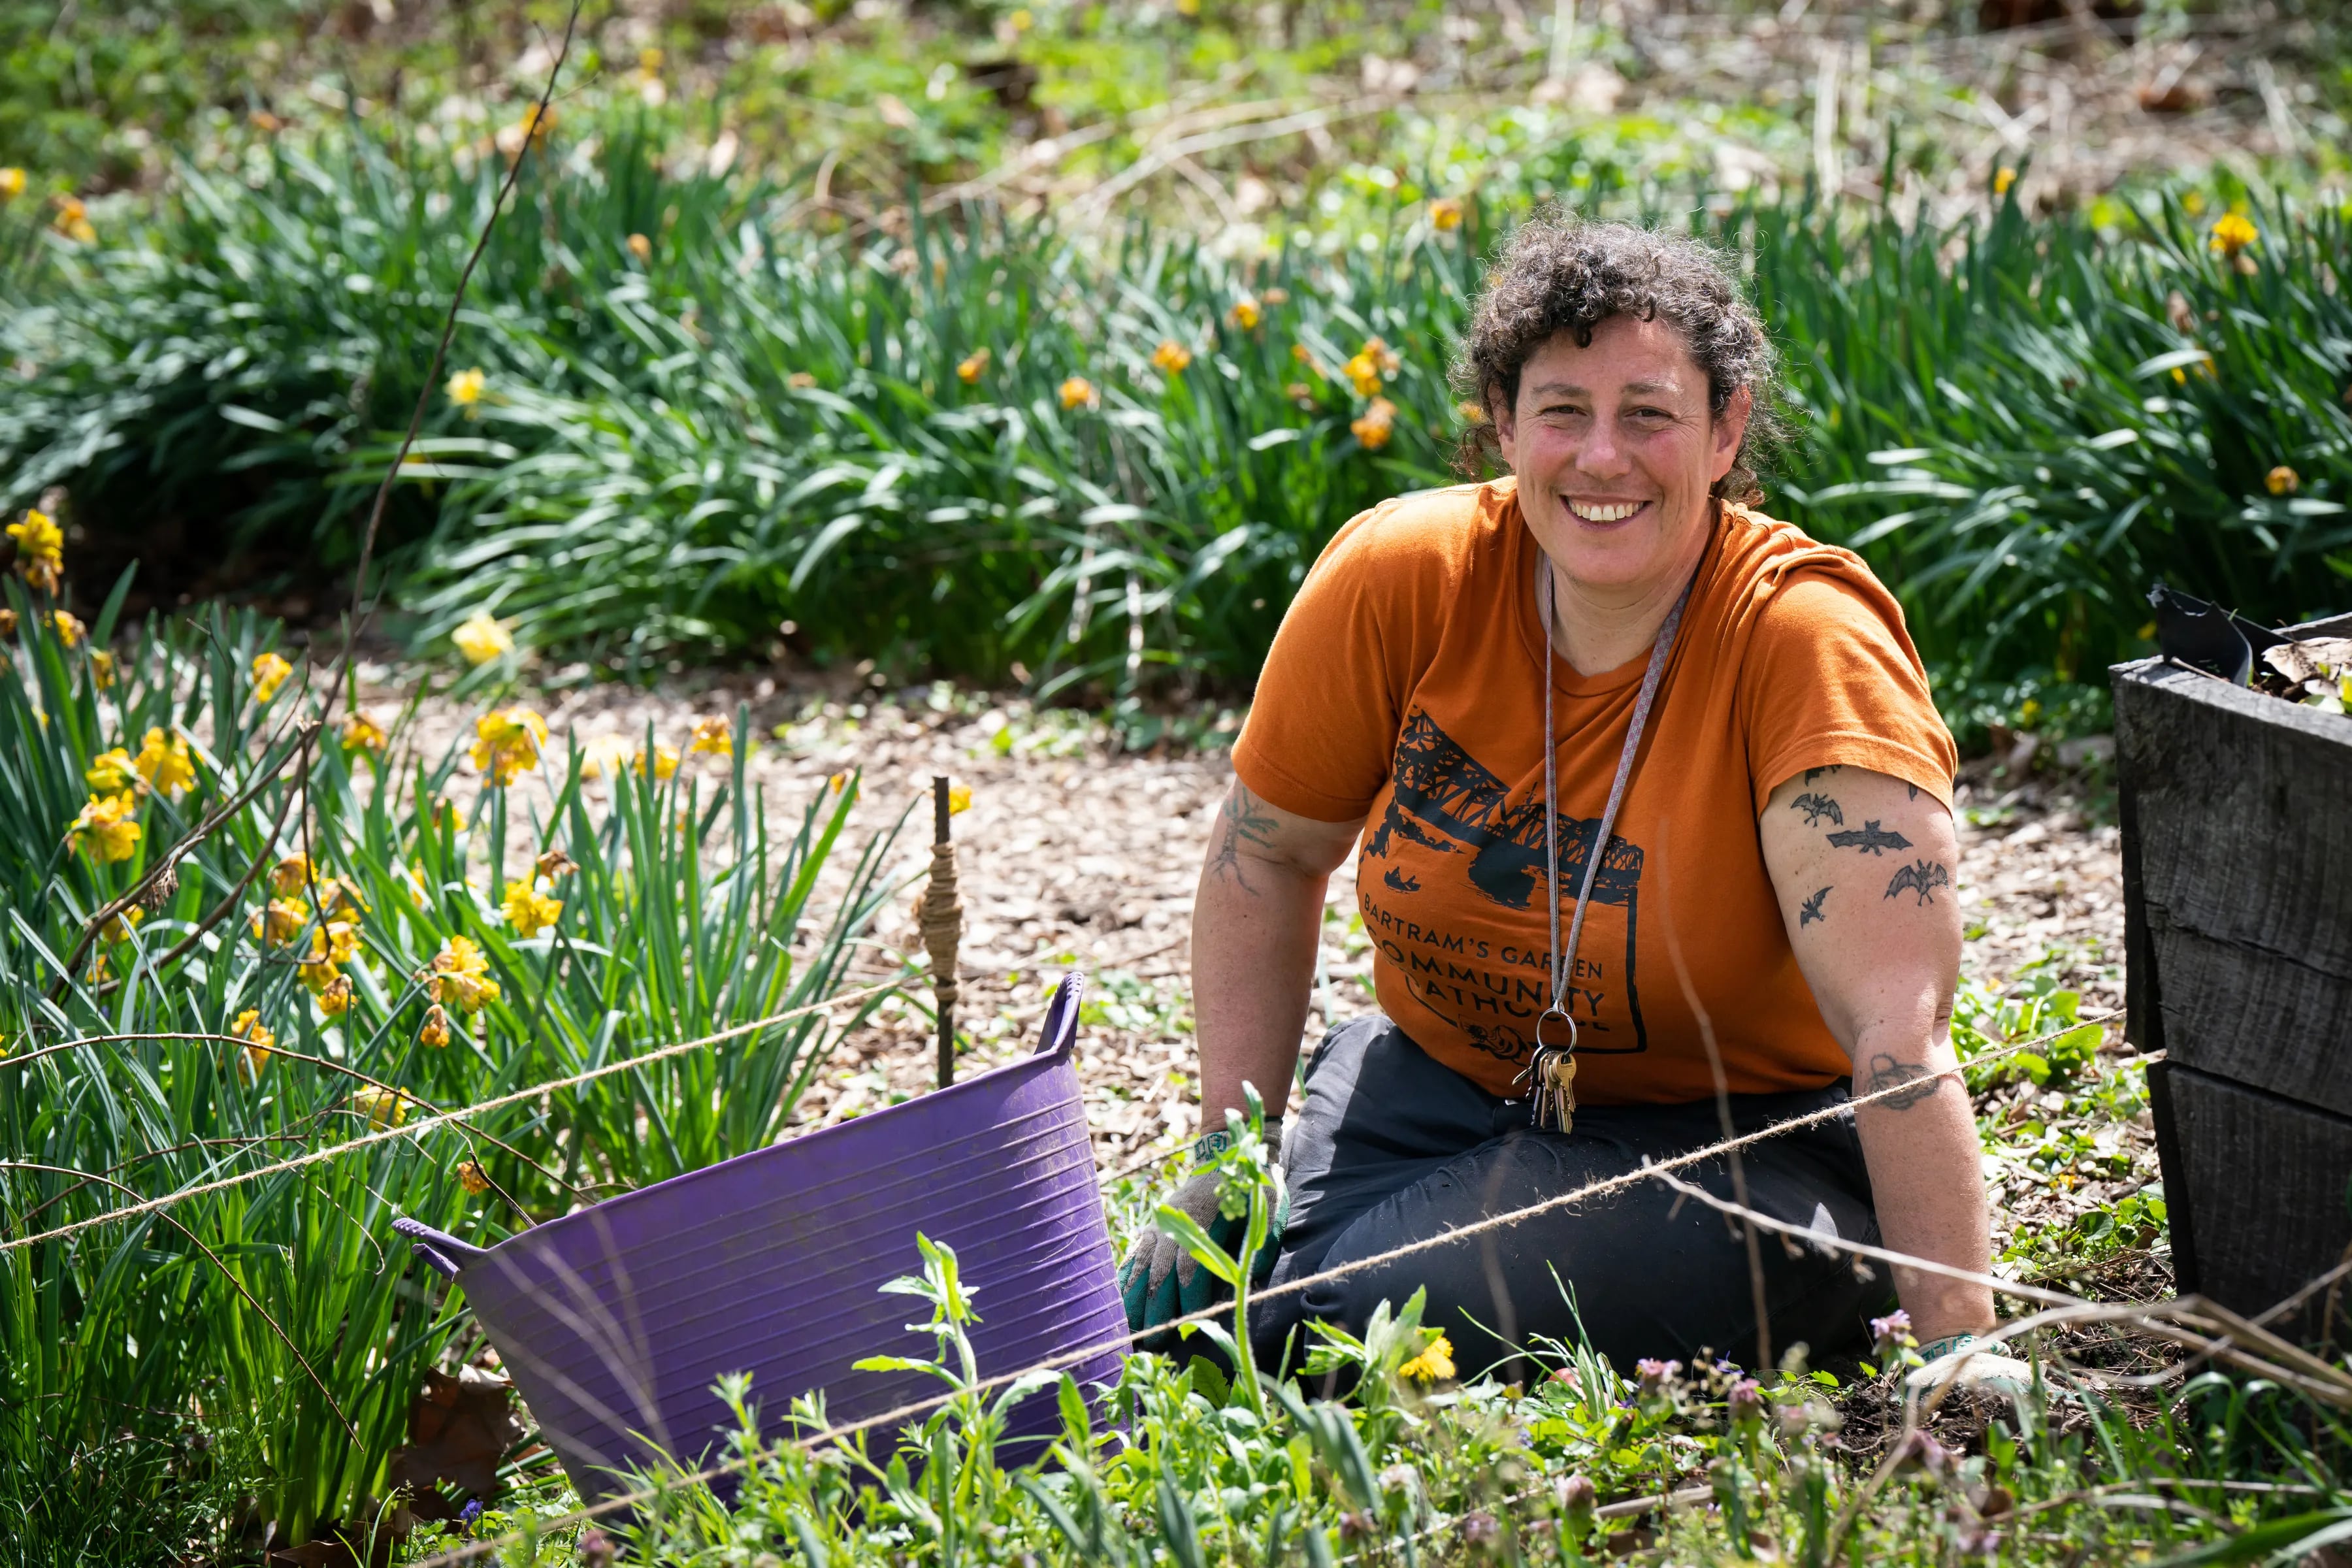 Mandy Katz, lead gardener and land manager at Bartram's Garden, spends time in the weeds. 